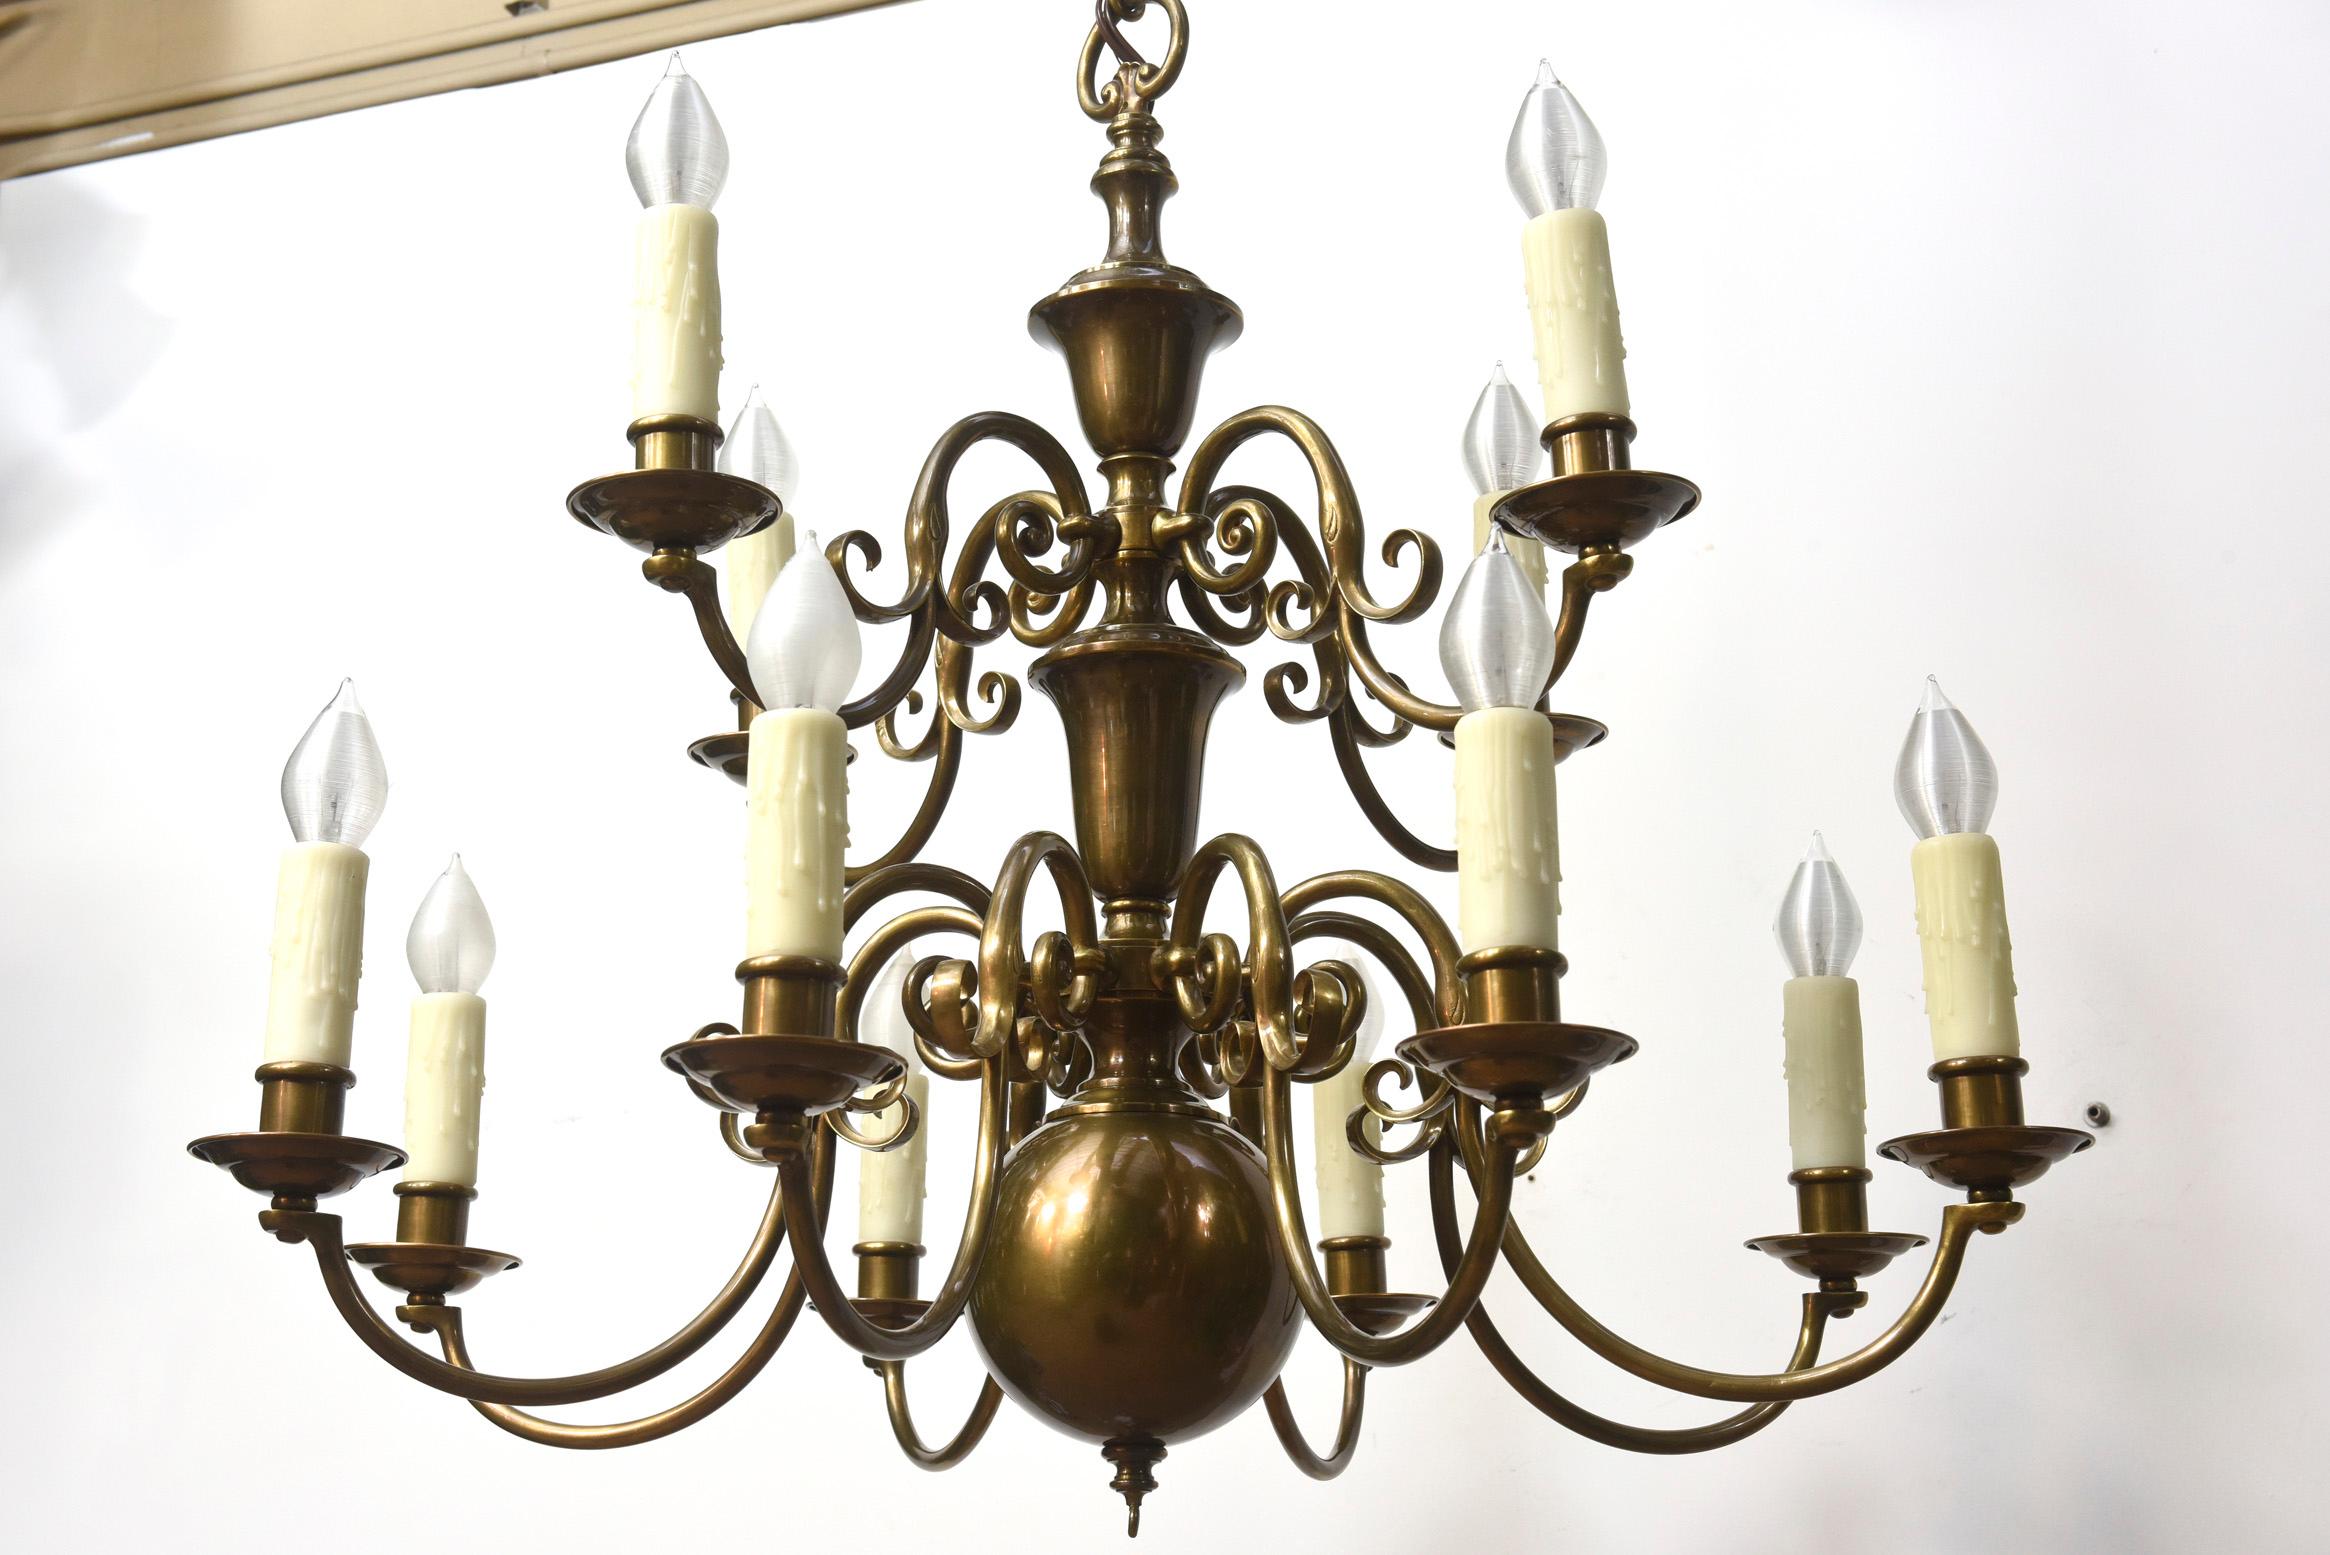 Twelve Light Colonial Chandelier. Brass with a dark patina. C. 1900. Completely rewired and restored, ready to hang.

Dimensions: 
Height: 44